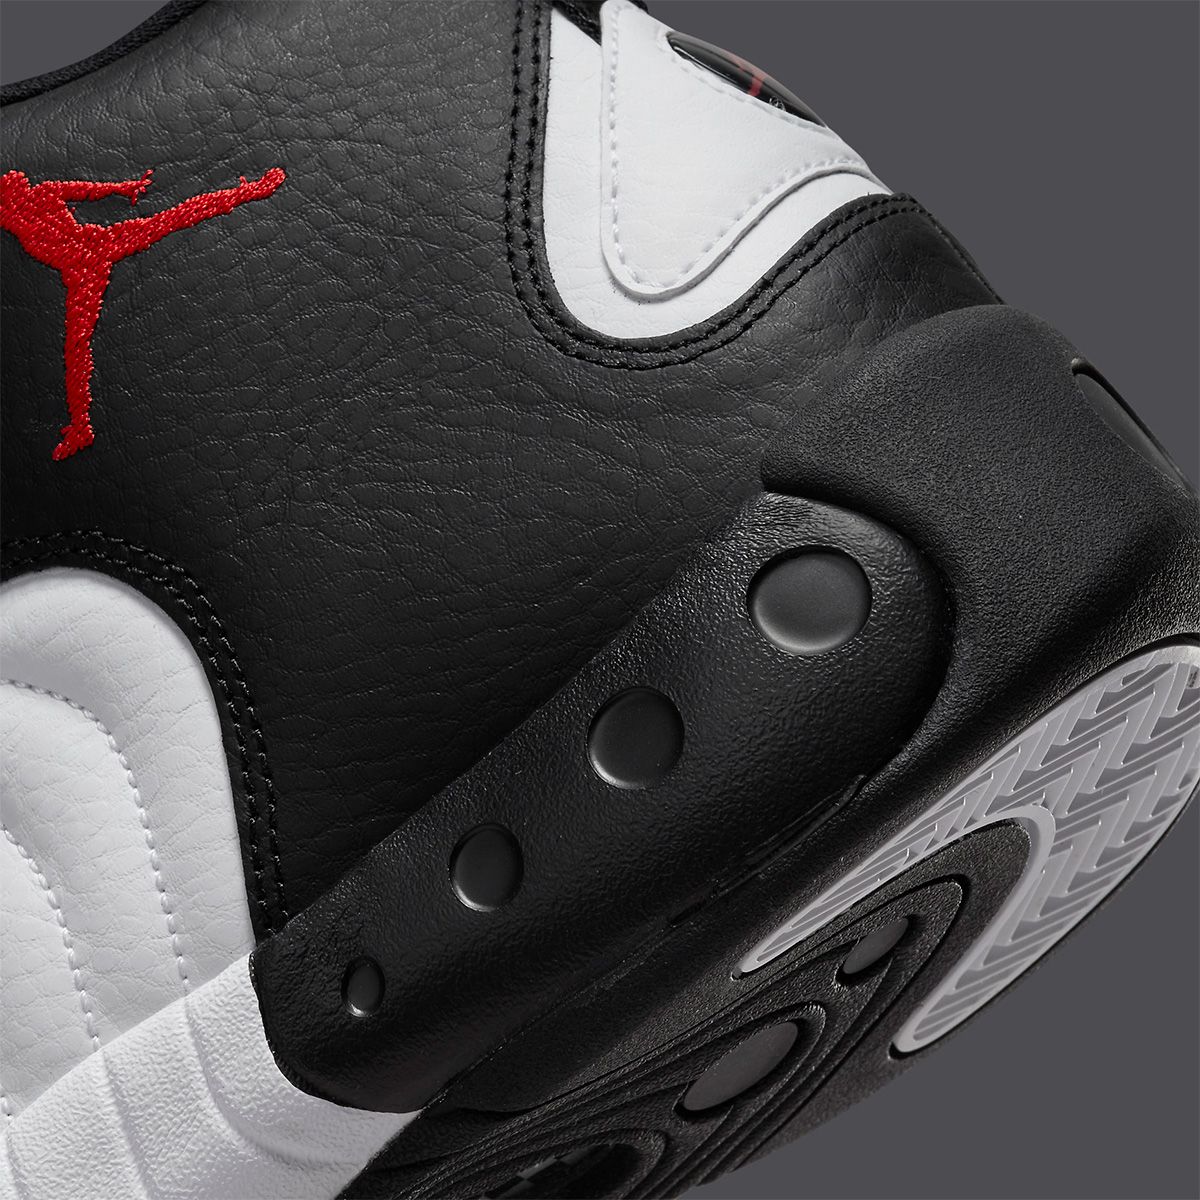 The Jordan Jumpman Pro Appears in a Bulls-Friendly Black, White and Red ...